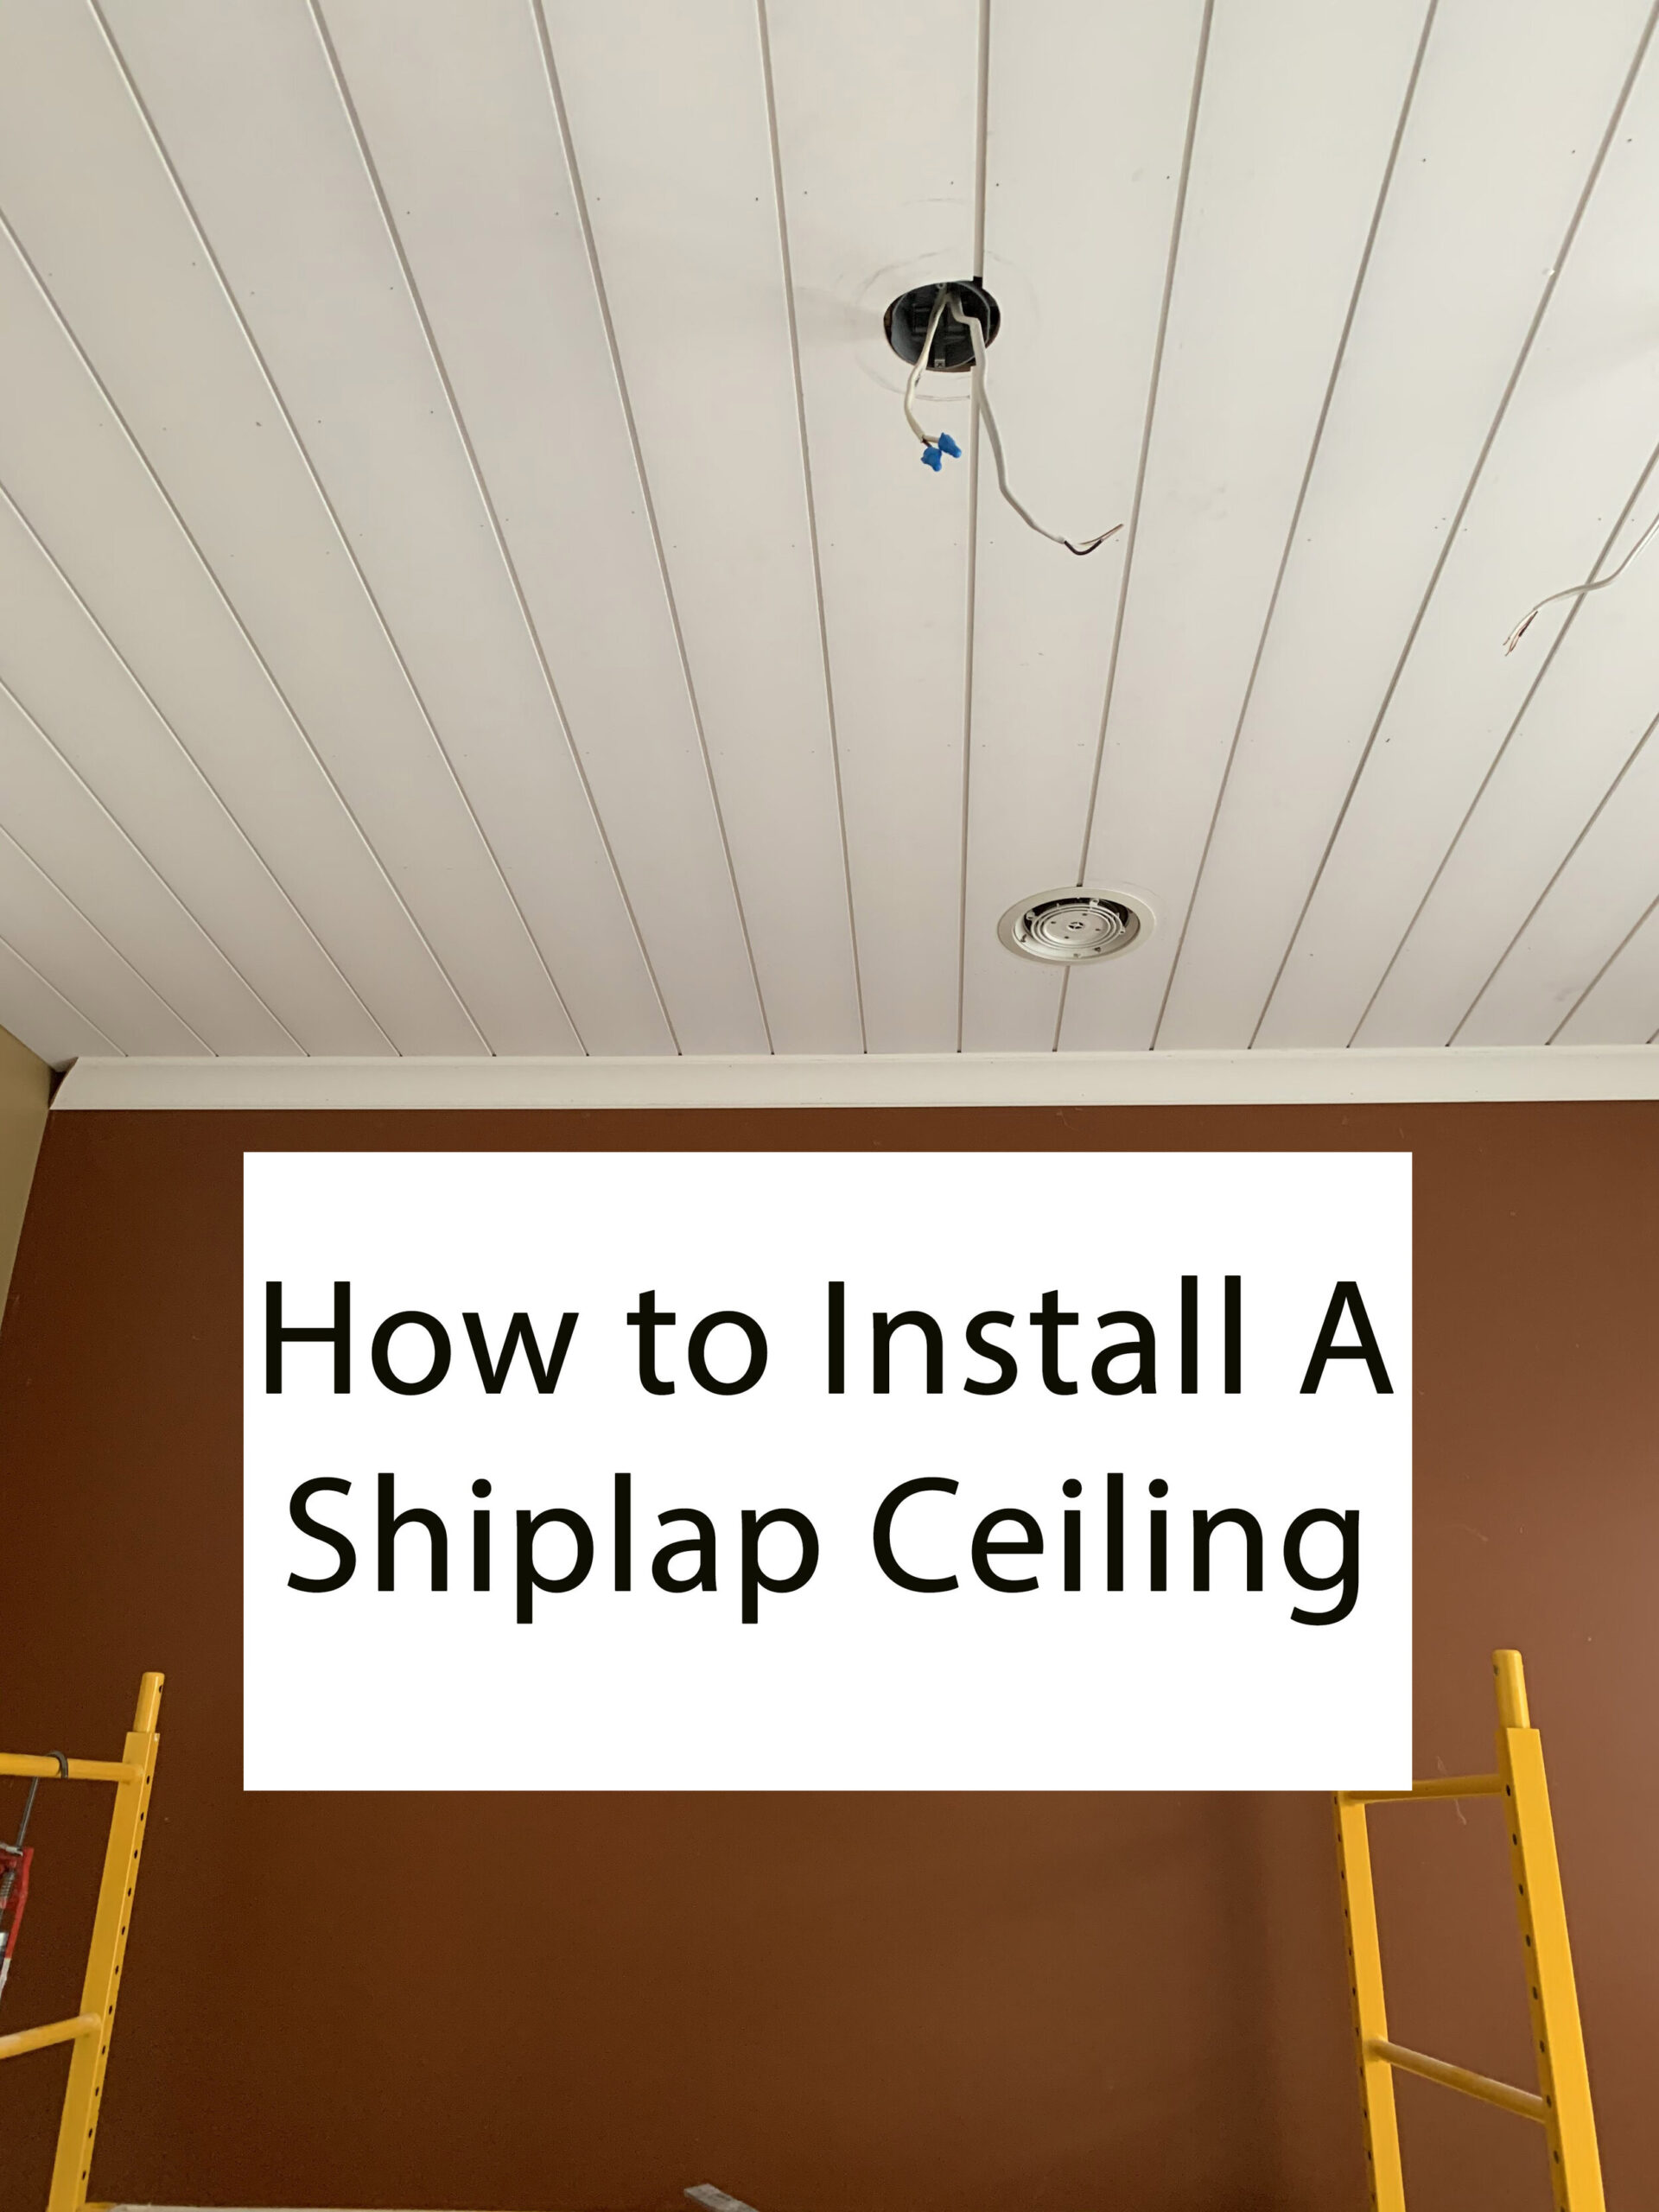 graphic reading "how to install a shiplap ceiling" with white shiplap ceiling and crown moulding and brown walls and scaffold